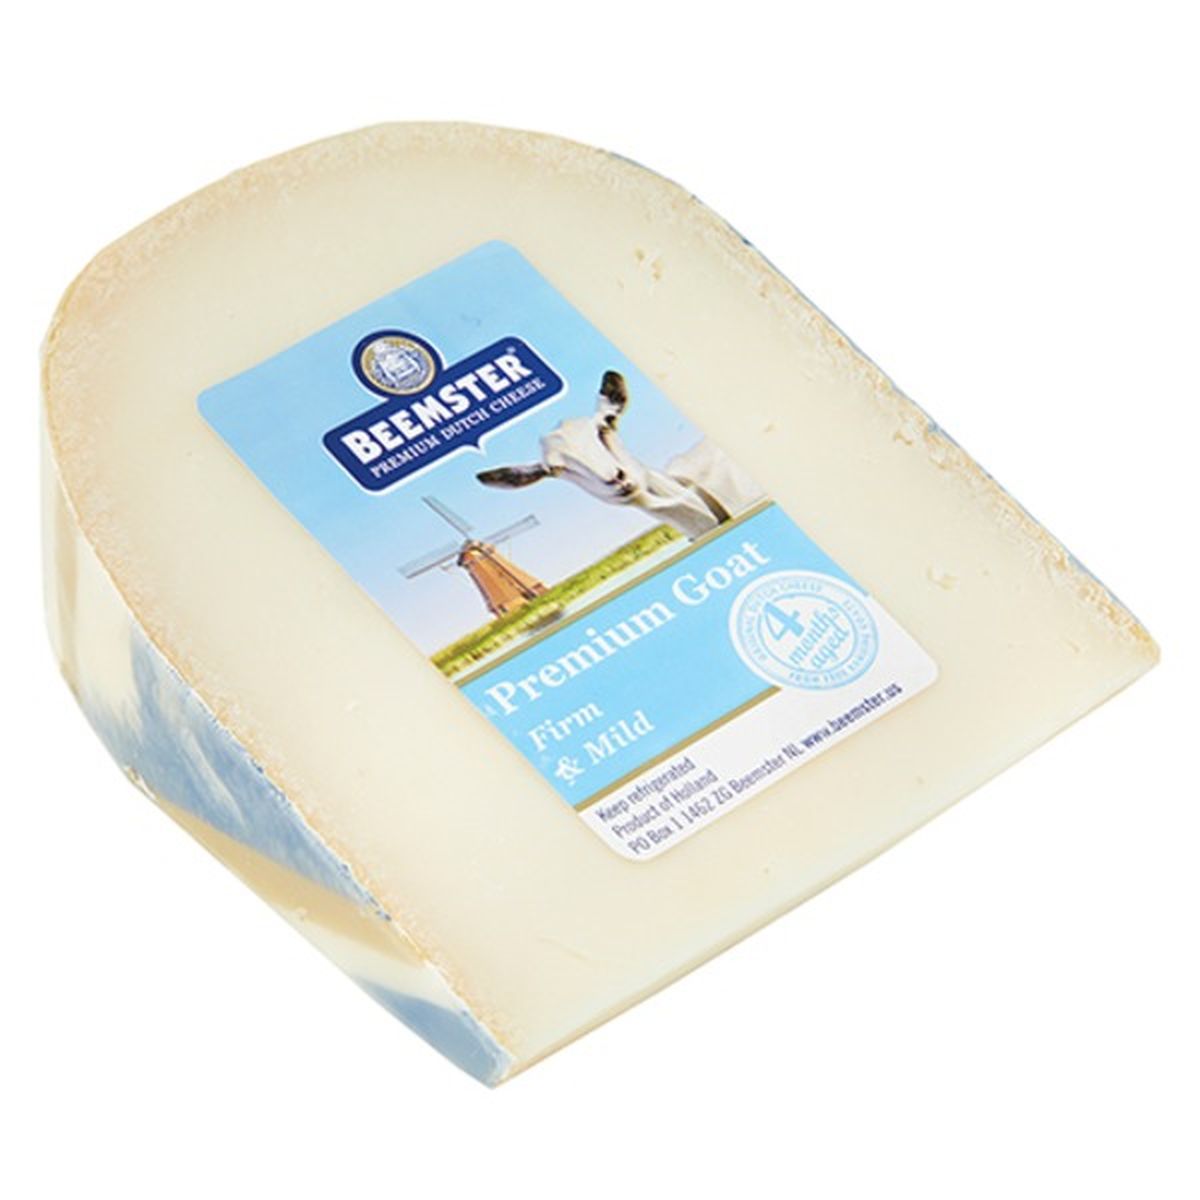 Calories in Beemster Cheese Premium Goat Gouda Cheese